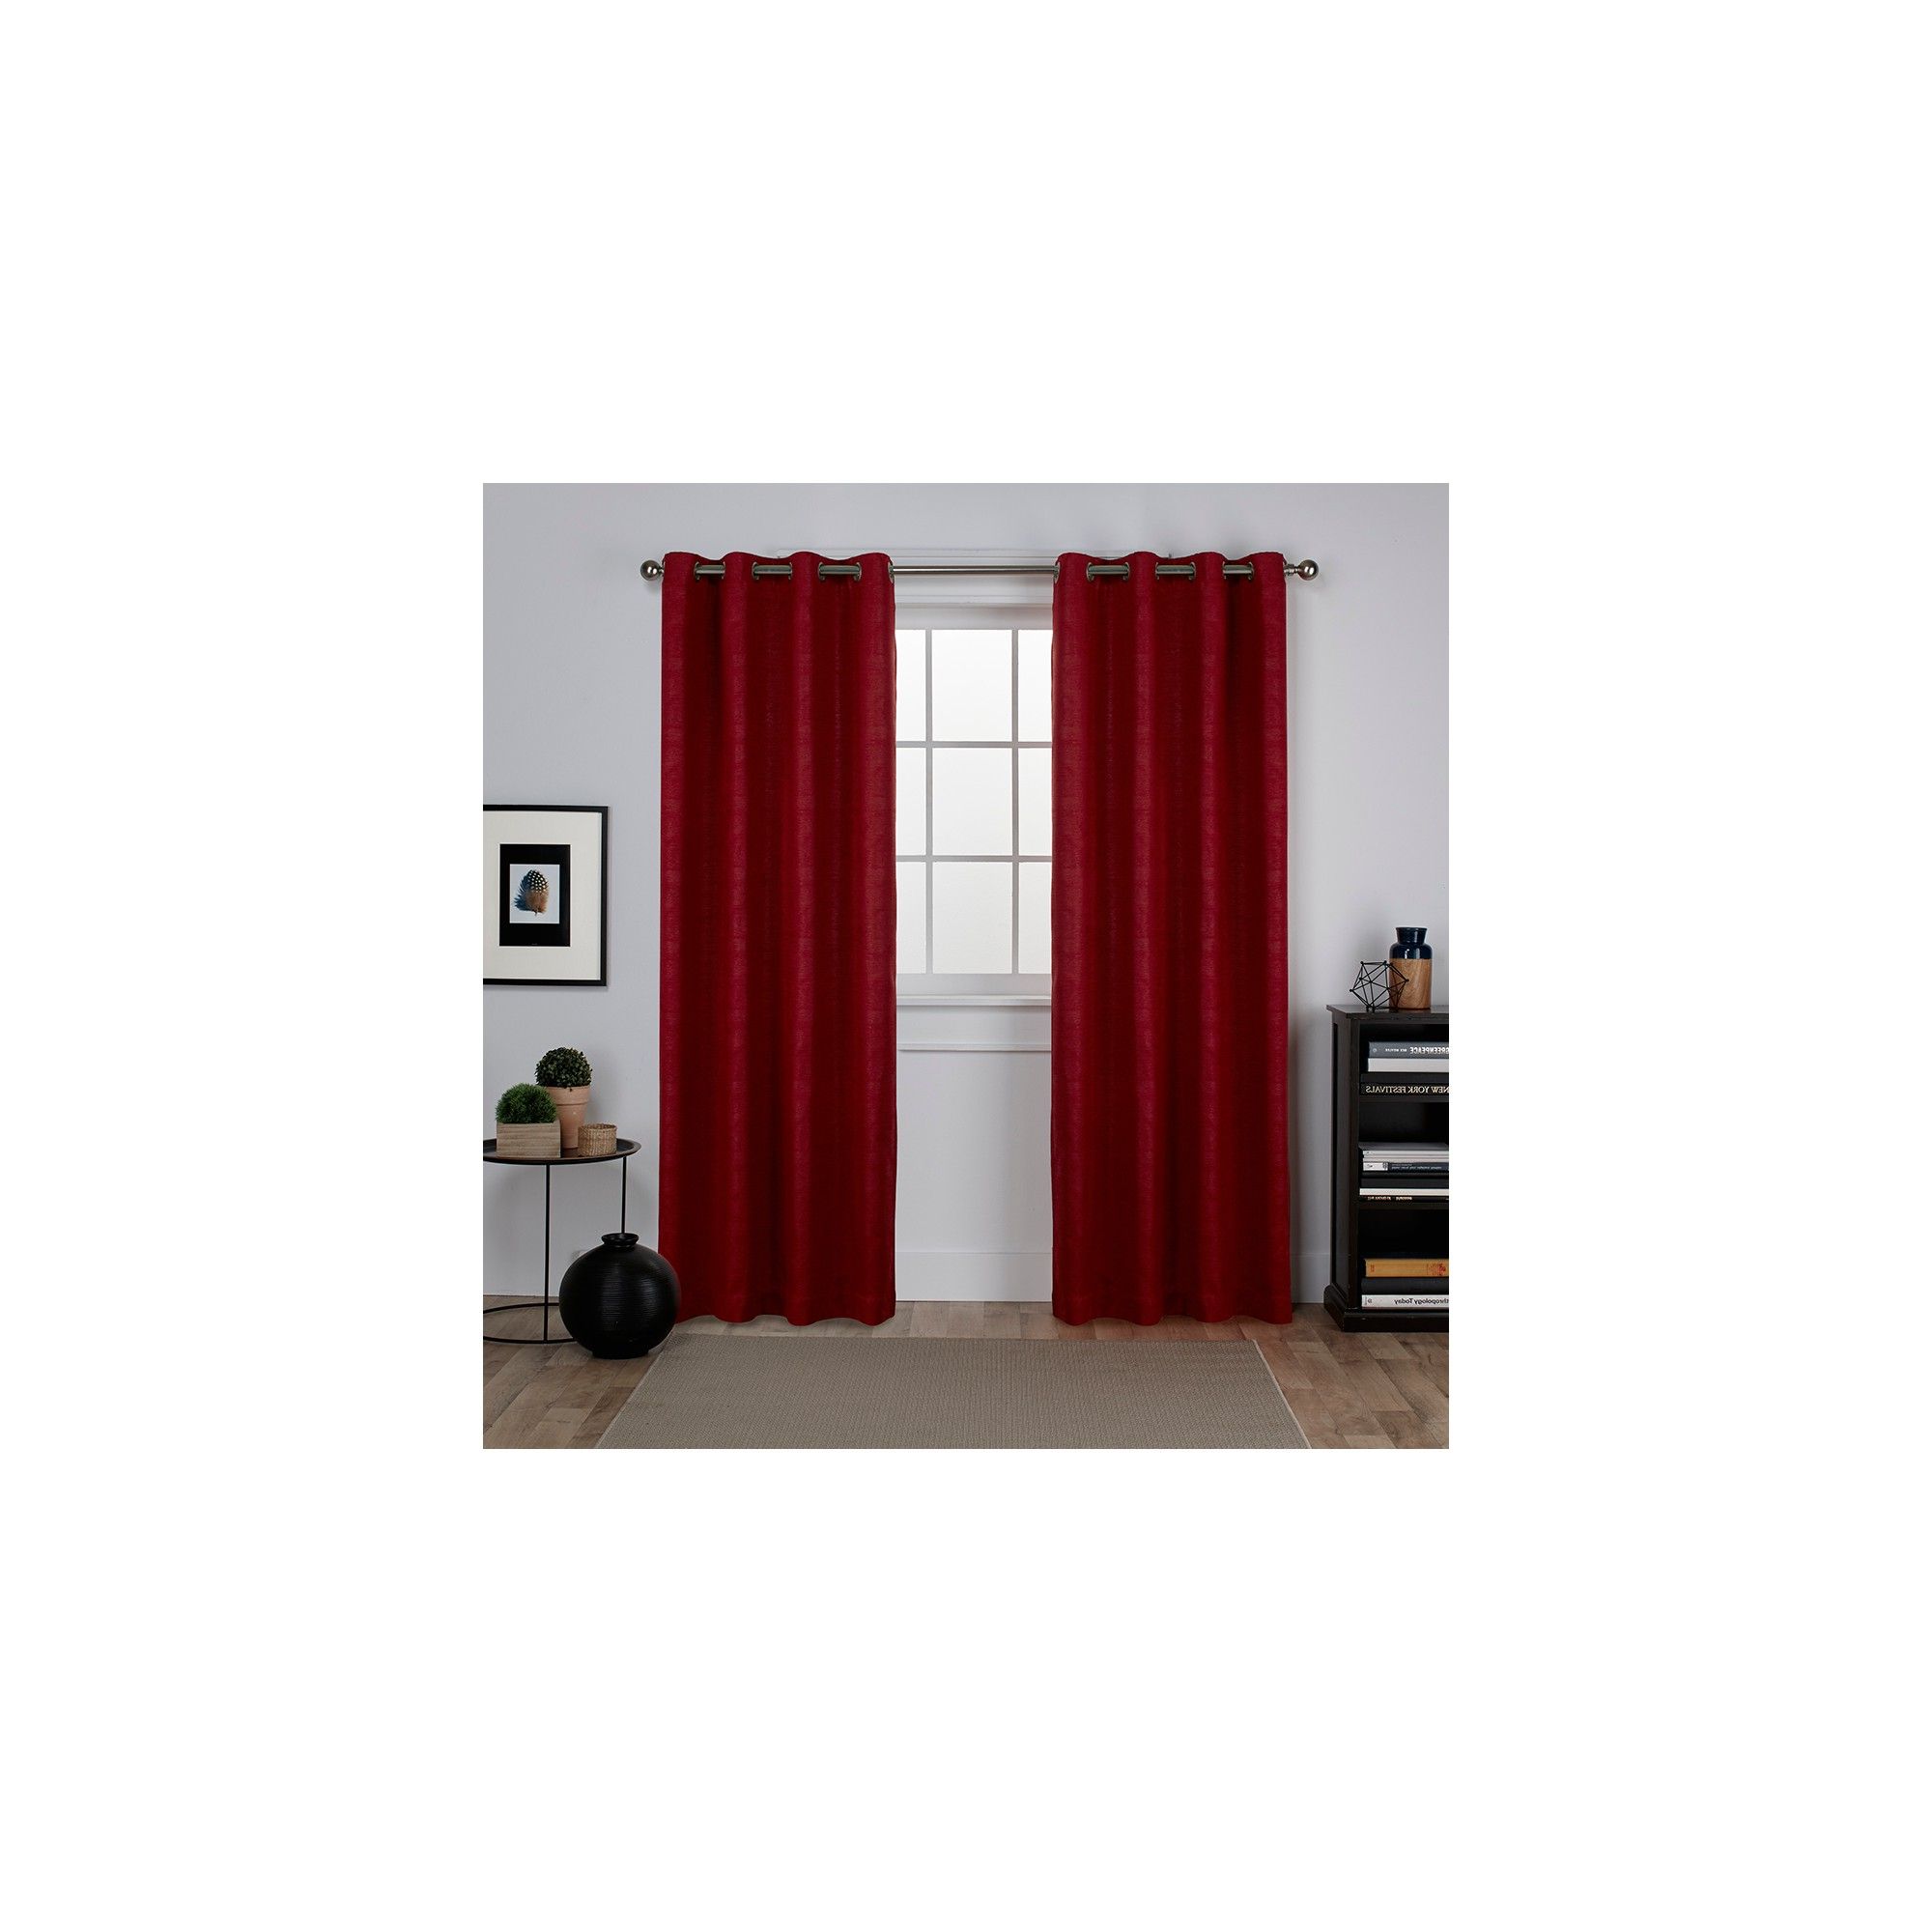 Most Recent Oxford Textured Sateen Thermal Room Darkening Grommet Top For Oxford Sateen Woven Blackout Grommet Top Curtain Panel Pairs (View 8 of 20)